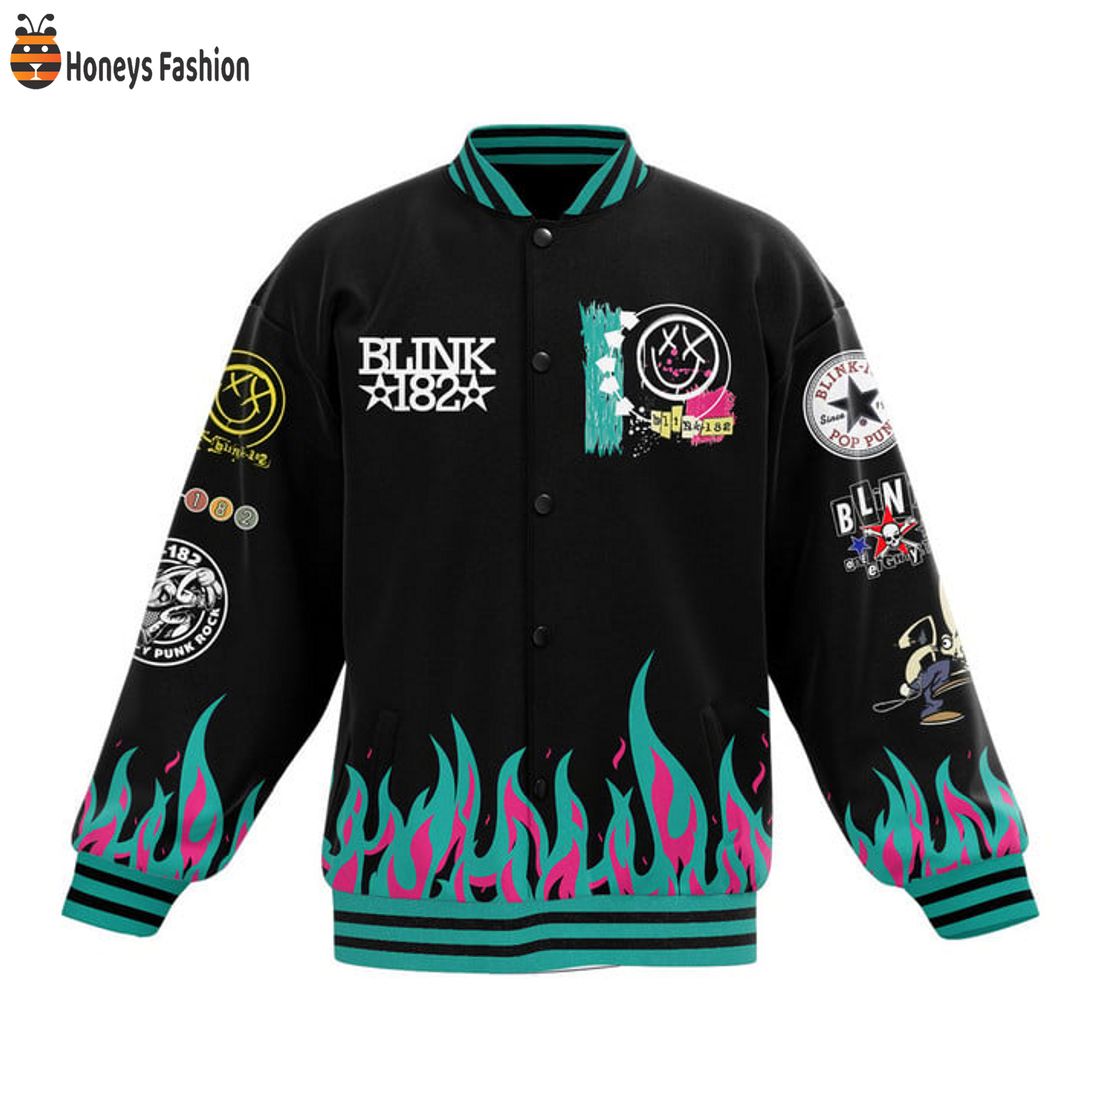 TRENDING Blink 182 All The Small Things True Care Truth Brings Baseball Jacket